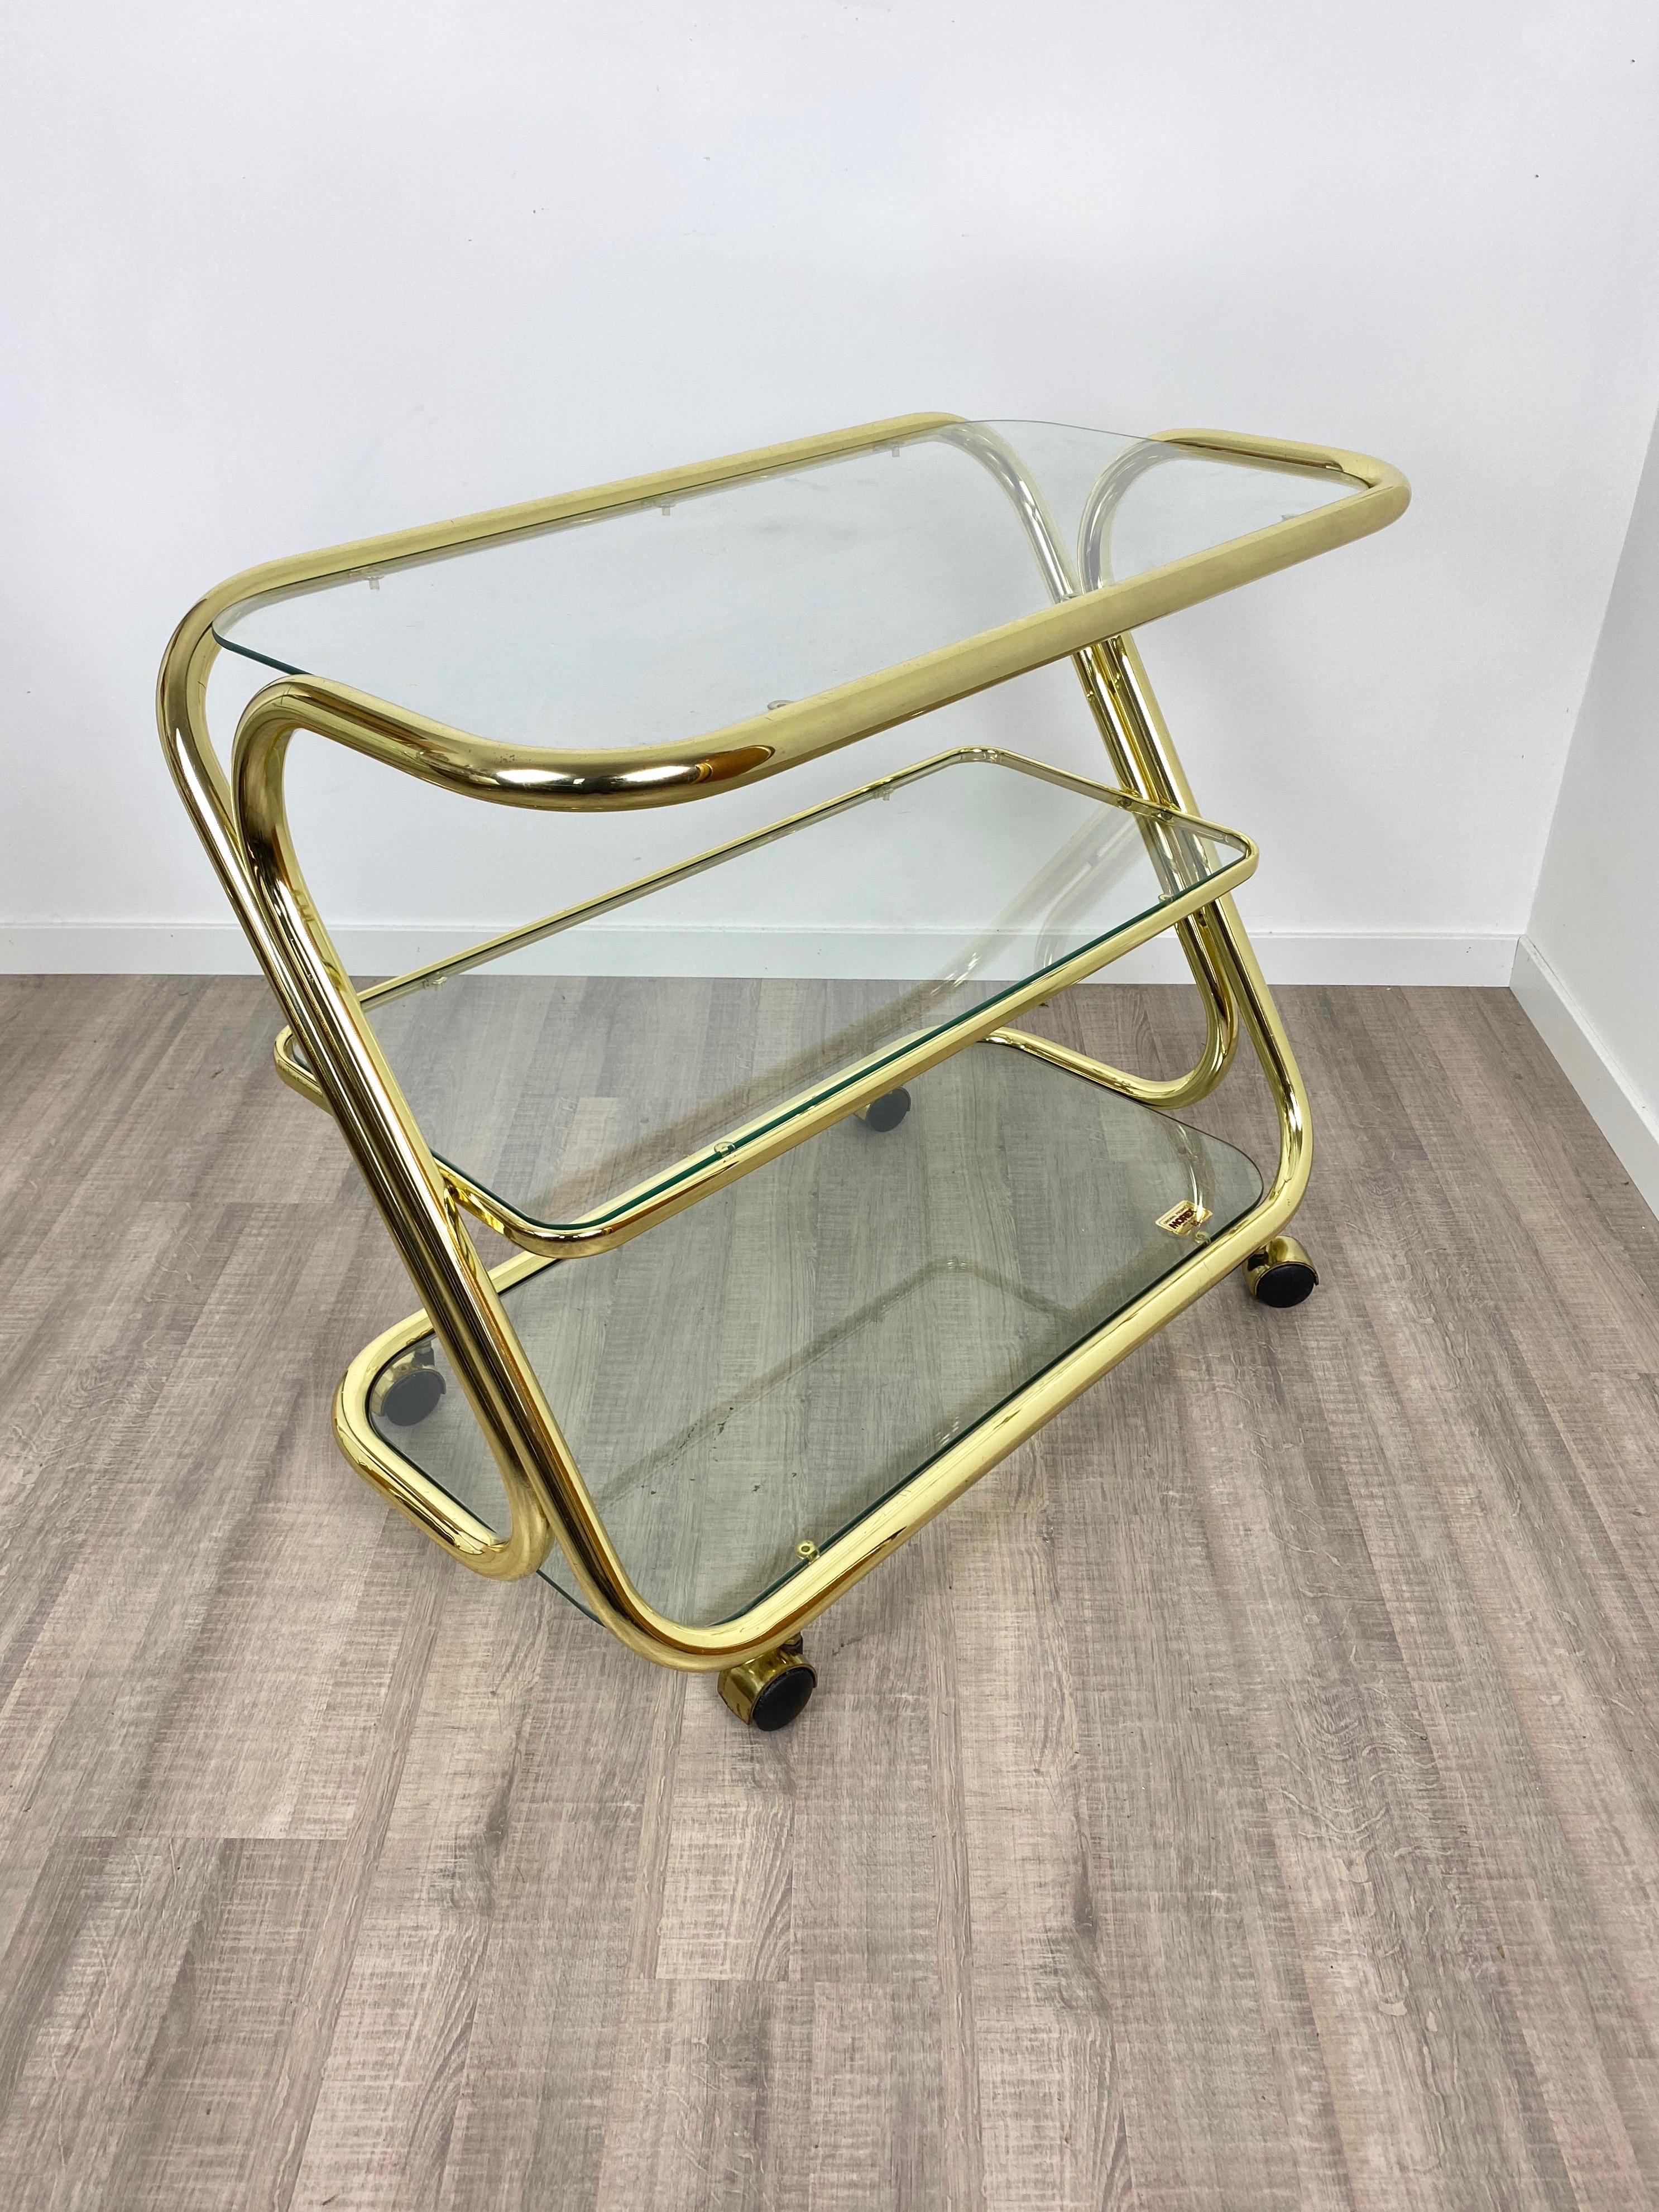 Serving Cart Trolley in Glass and Golden Metal by Morex, Italy, 1980s For Sale 2